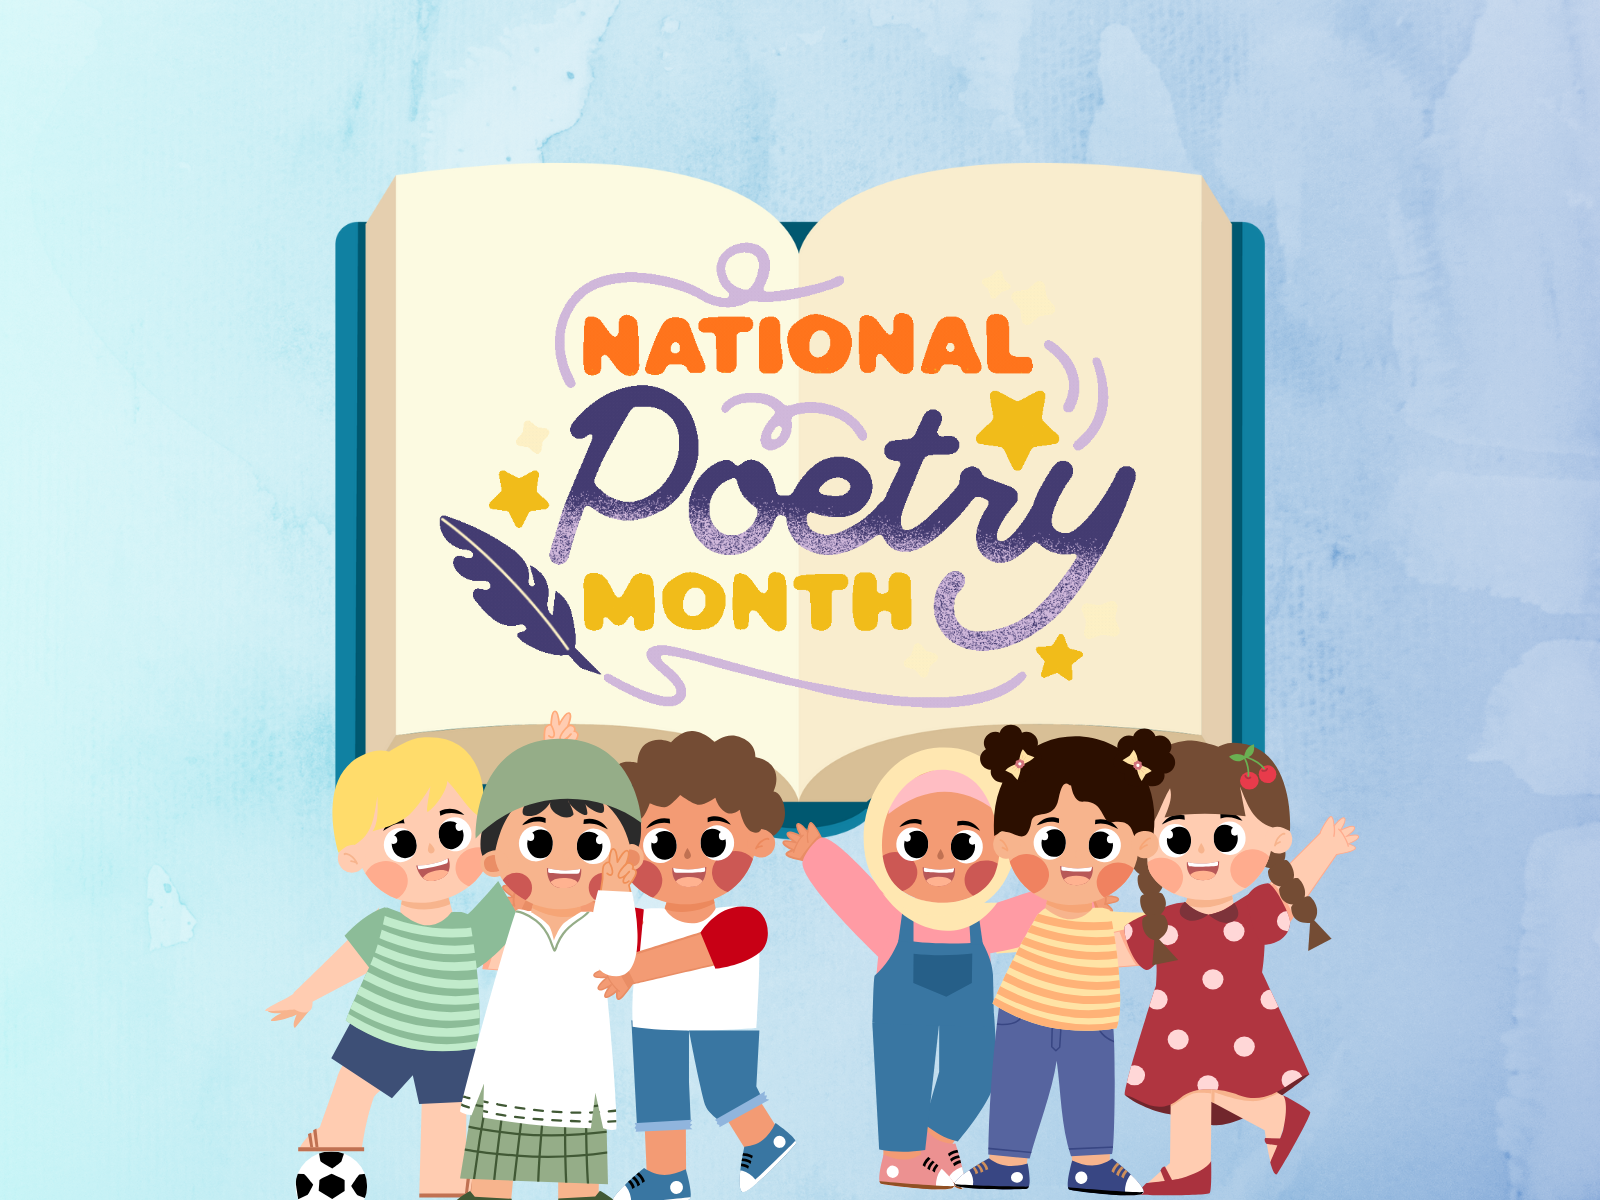 Poetry Month